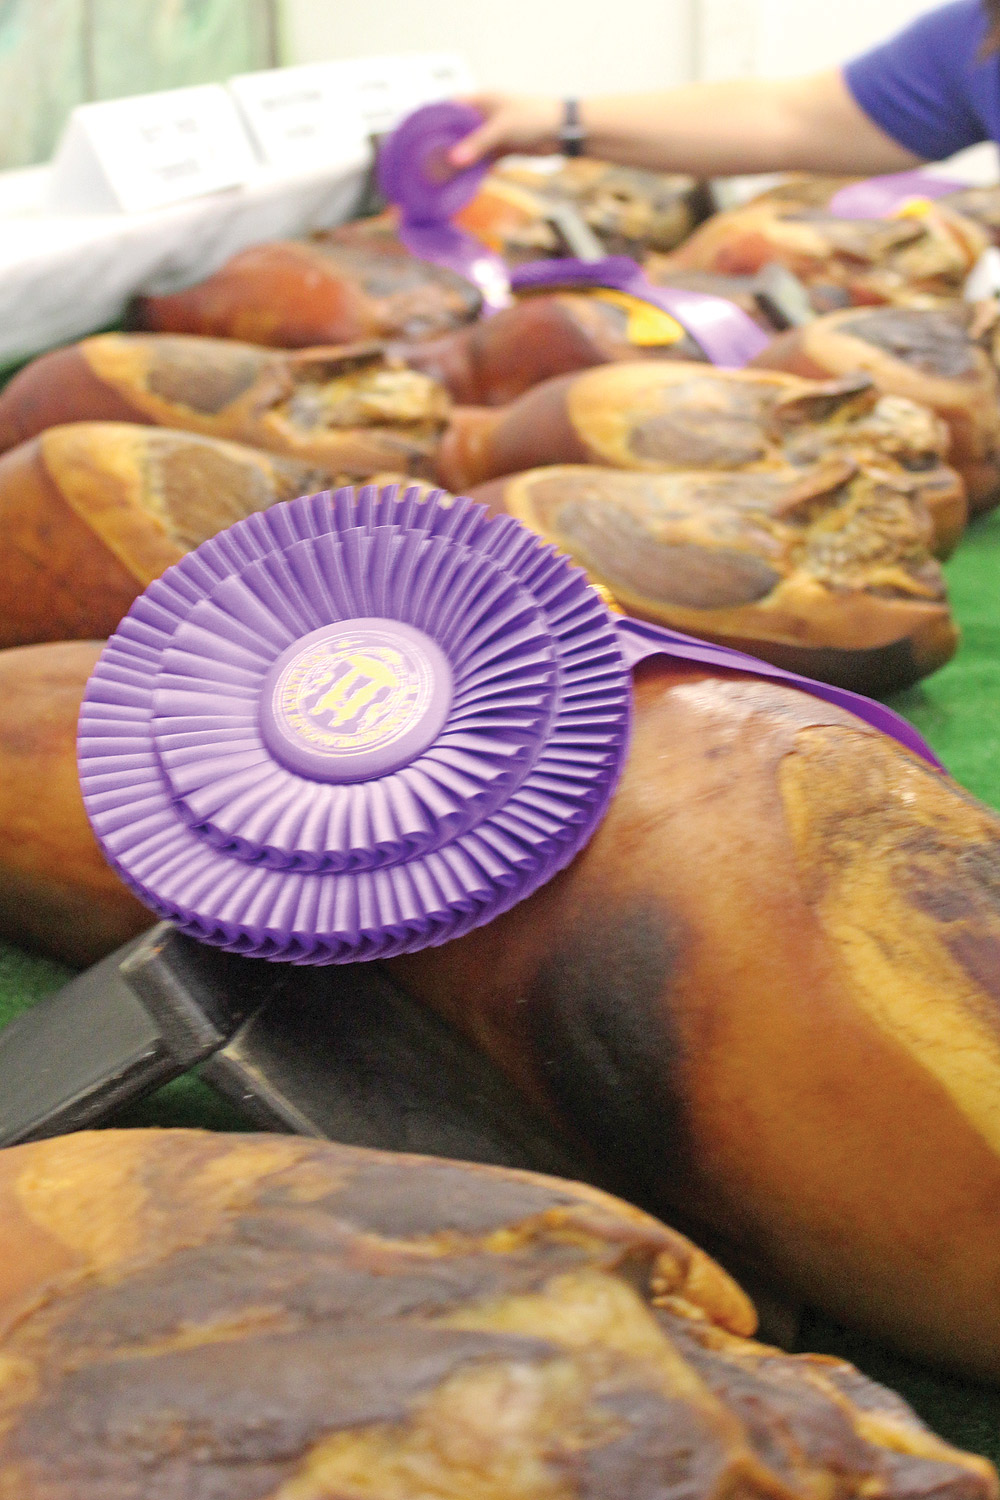 Country Ham Competition at Kentucky State Fair